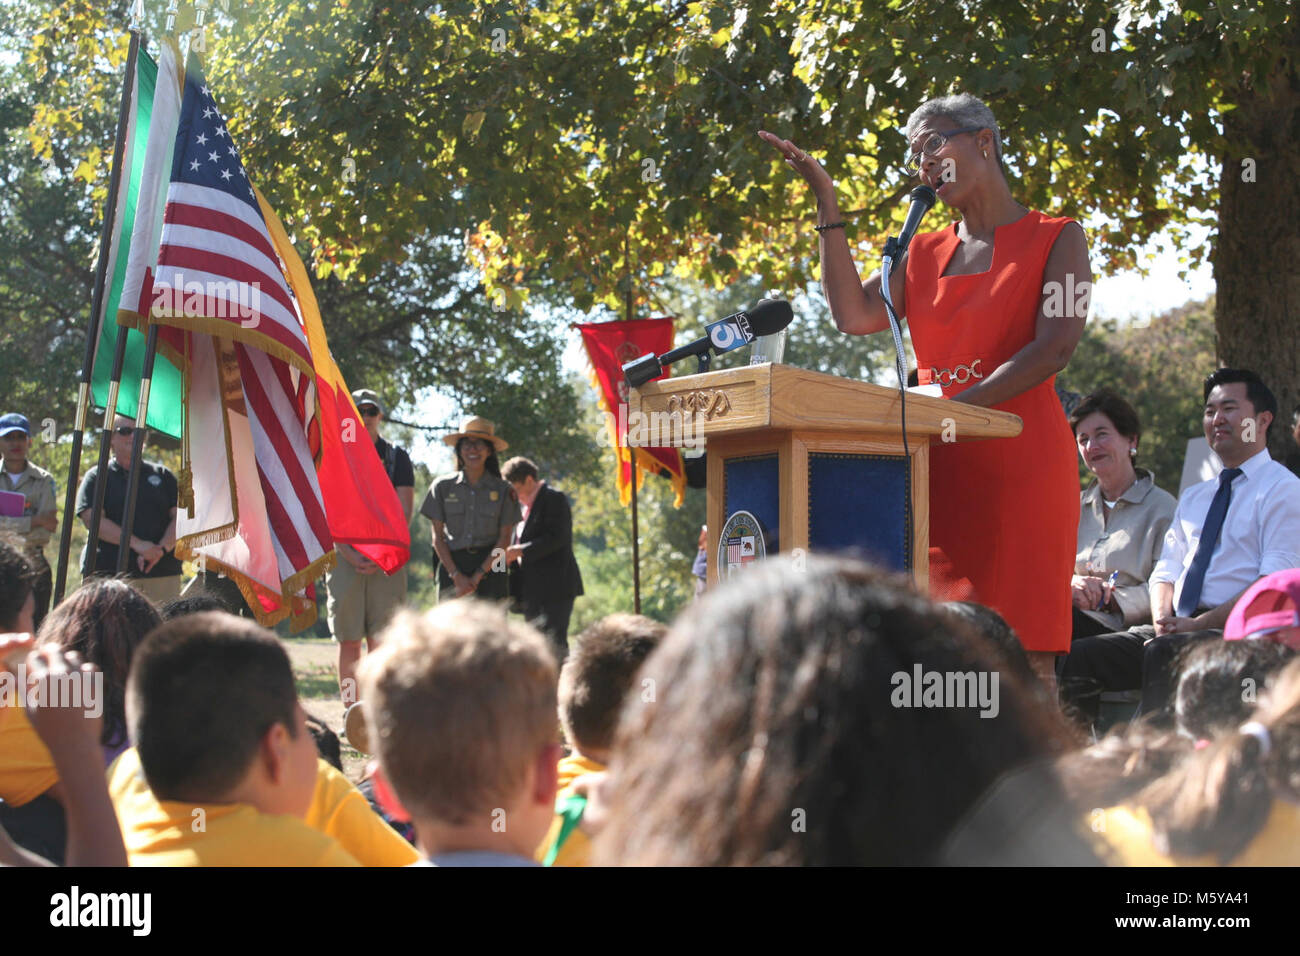 Julie Williams. Mayor Eric Garcetti, County Supervisor Sheila Kuehl, and members of the City Council helped kick of the L.A. launch of the Every Kid in a Park program on October 15, 2015 near Santa Monica Mountains National Recreation Area. Nearly 500 local 4th-graders participated in educational activities and were rewarded with a Junior Ranger badge and a free annual pass to all federal lands. Stock Photo